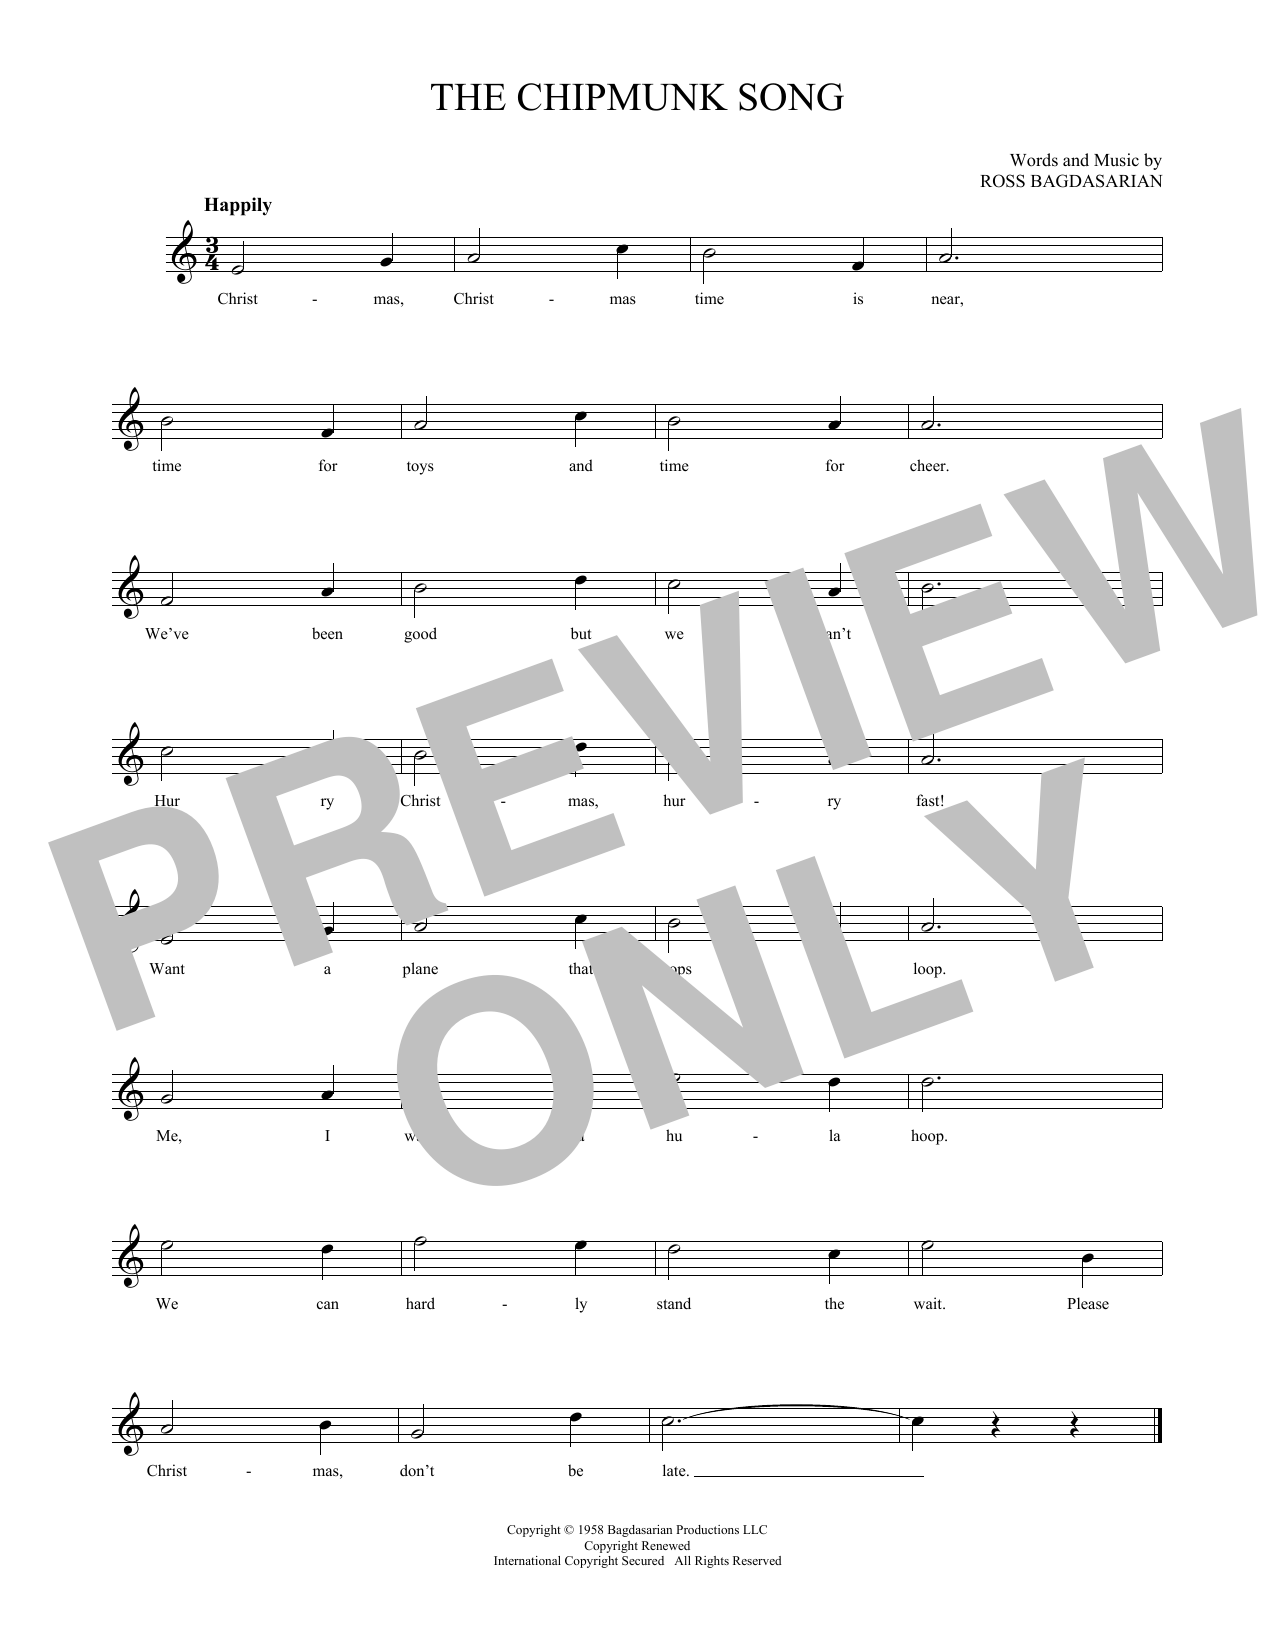 Download Alvin and the Chipmunks The Chipmunk Song Sheet Music